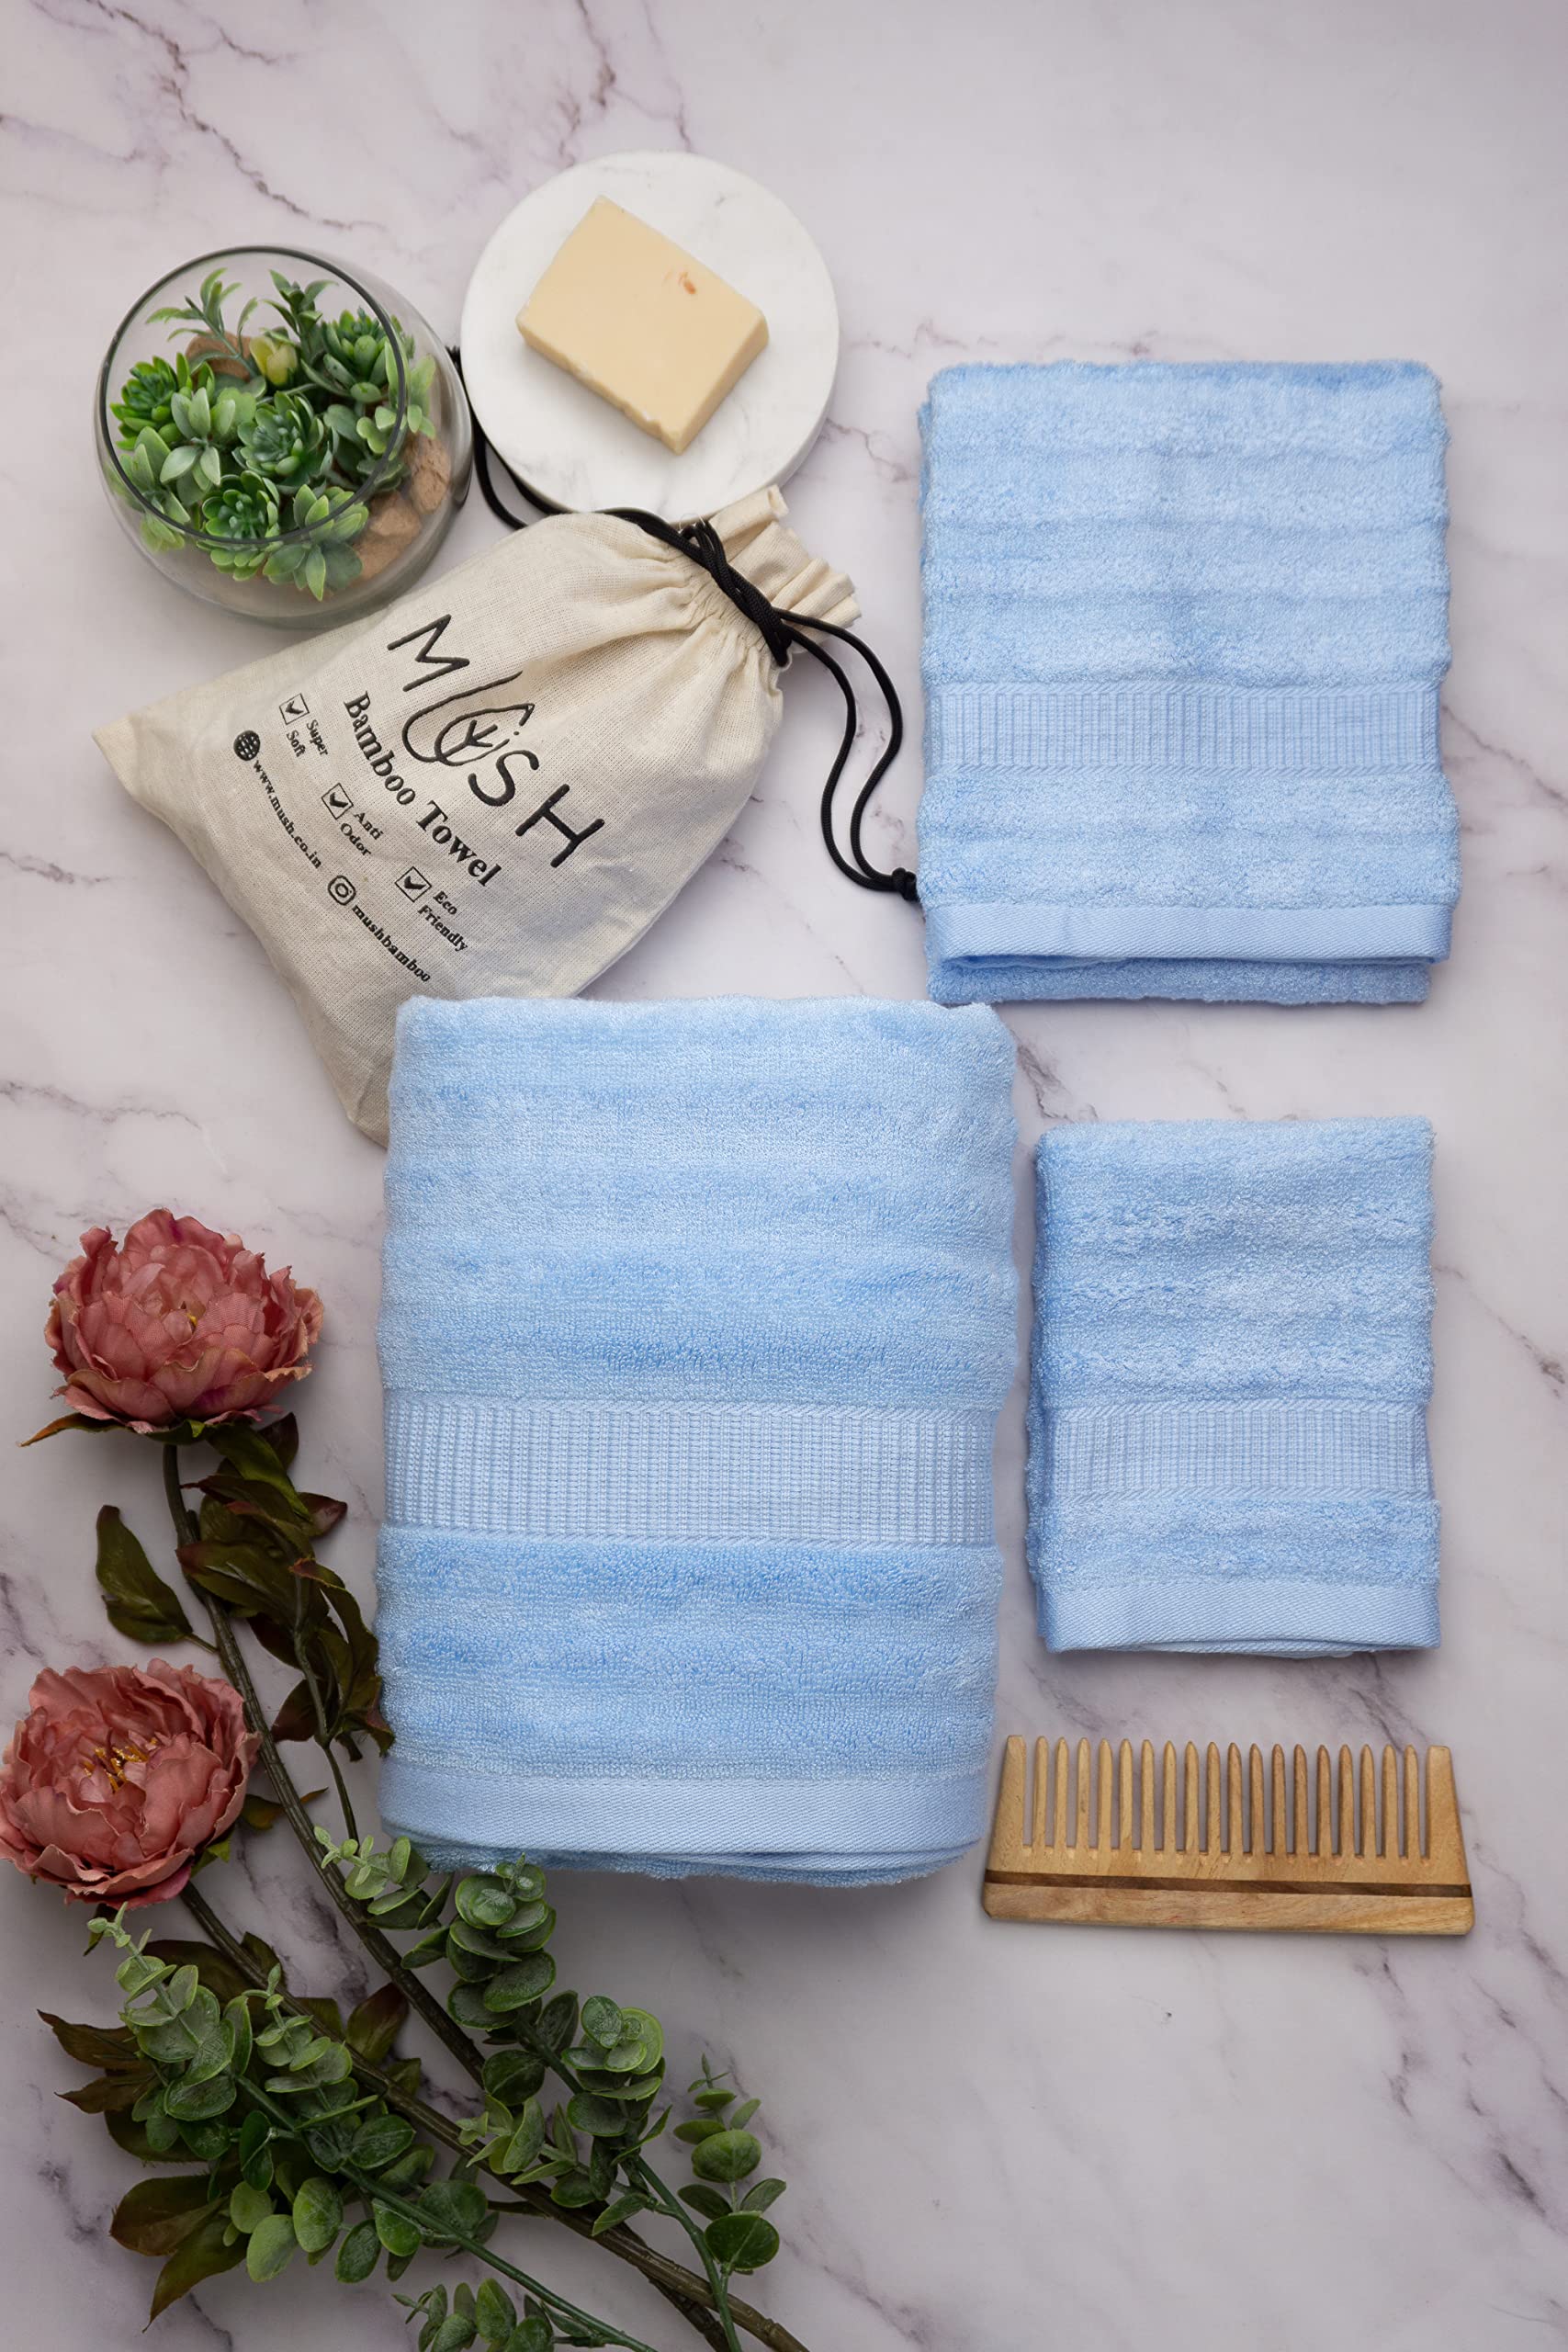 Mush Bamboo Towels for Bath Large Size | 600 GSM Bath Towel for Men & Women | Soft, Highly Absorbent, Quick Dry,and Anti Microbial | 75 X 150 cms (Pack of 1, Sky Blue)